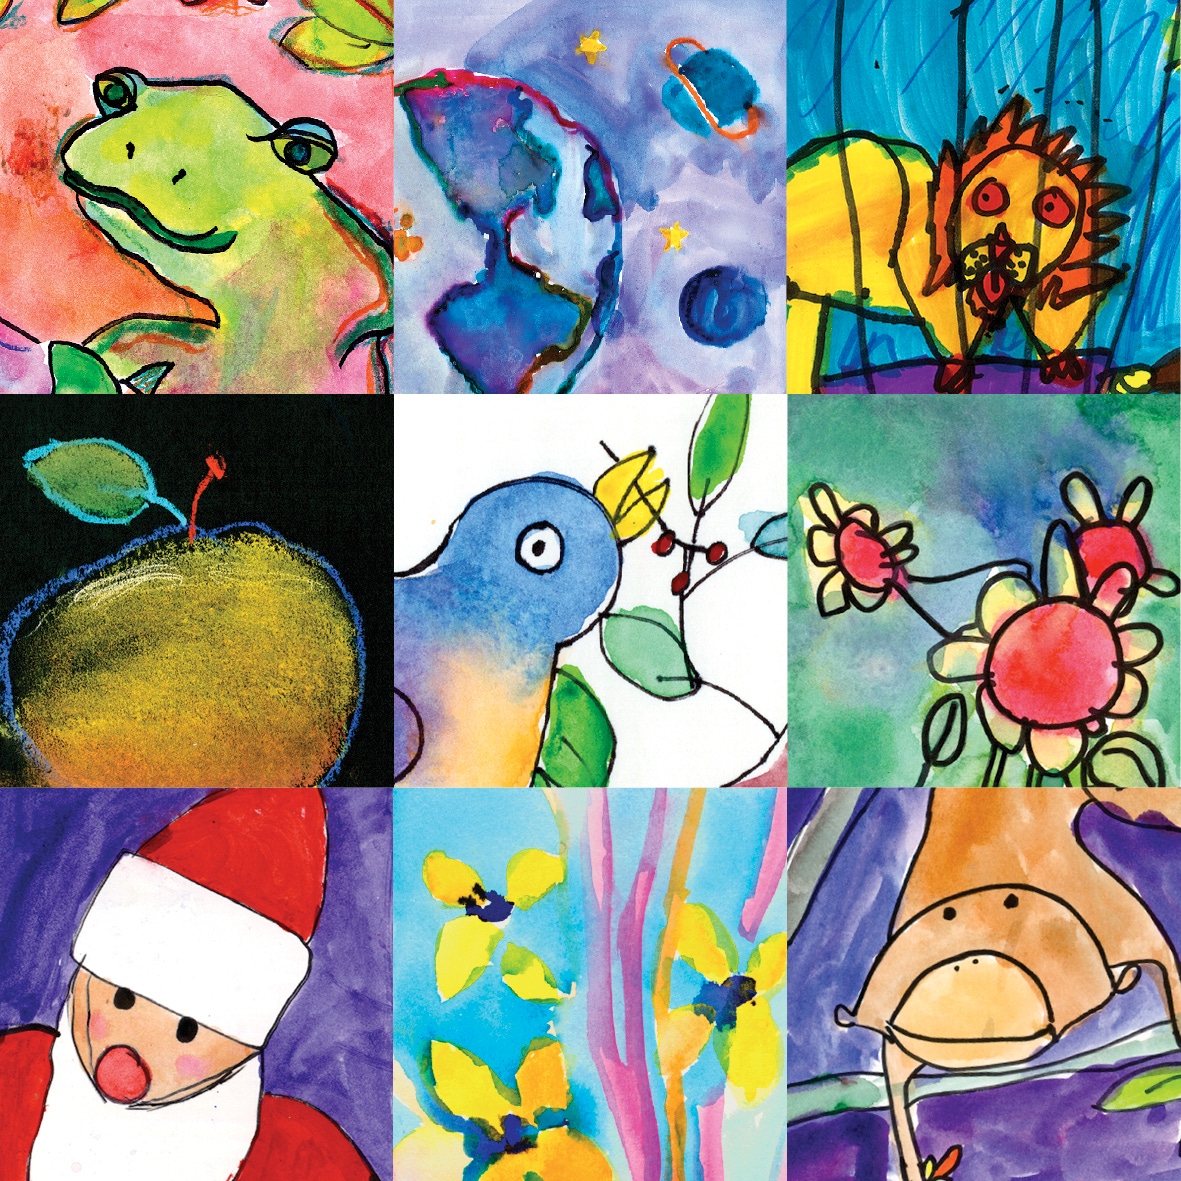 Original Art Made by Kids for Sale, Stock Images and Licensed Art  Illustrations, Kids-Did-It! Designs Kids' Art Collection